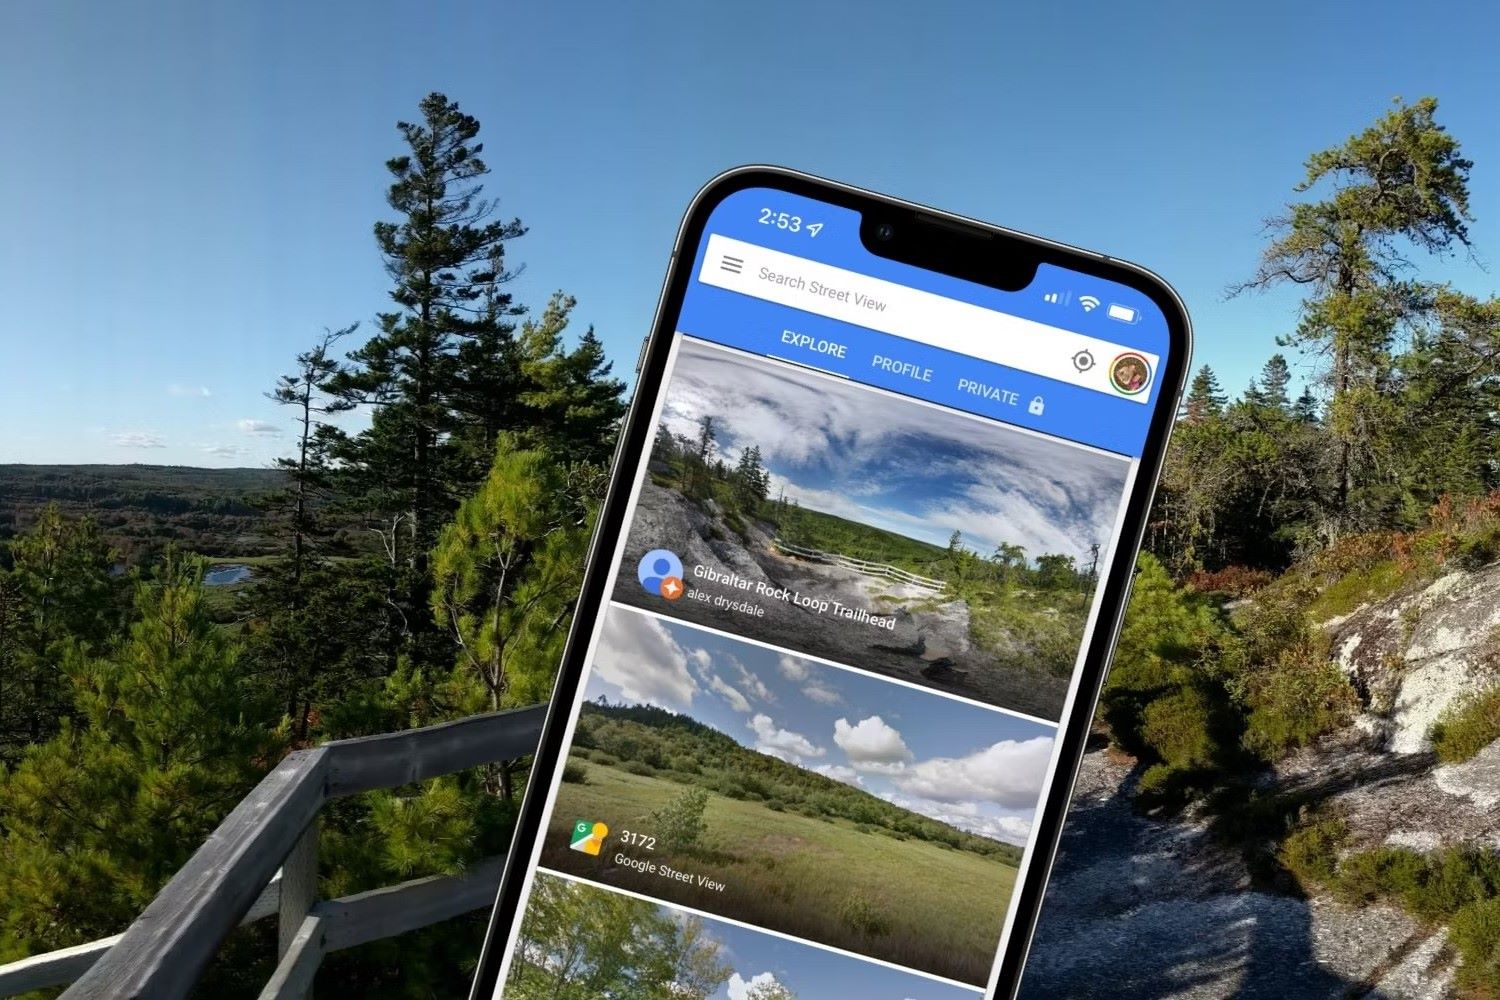 immersive-photography-capturing-360-photos-on-iphone-13